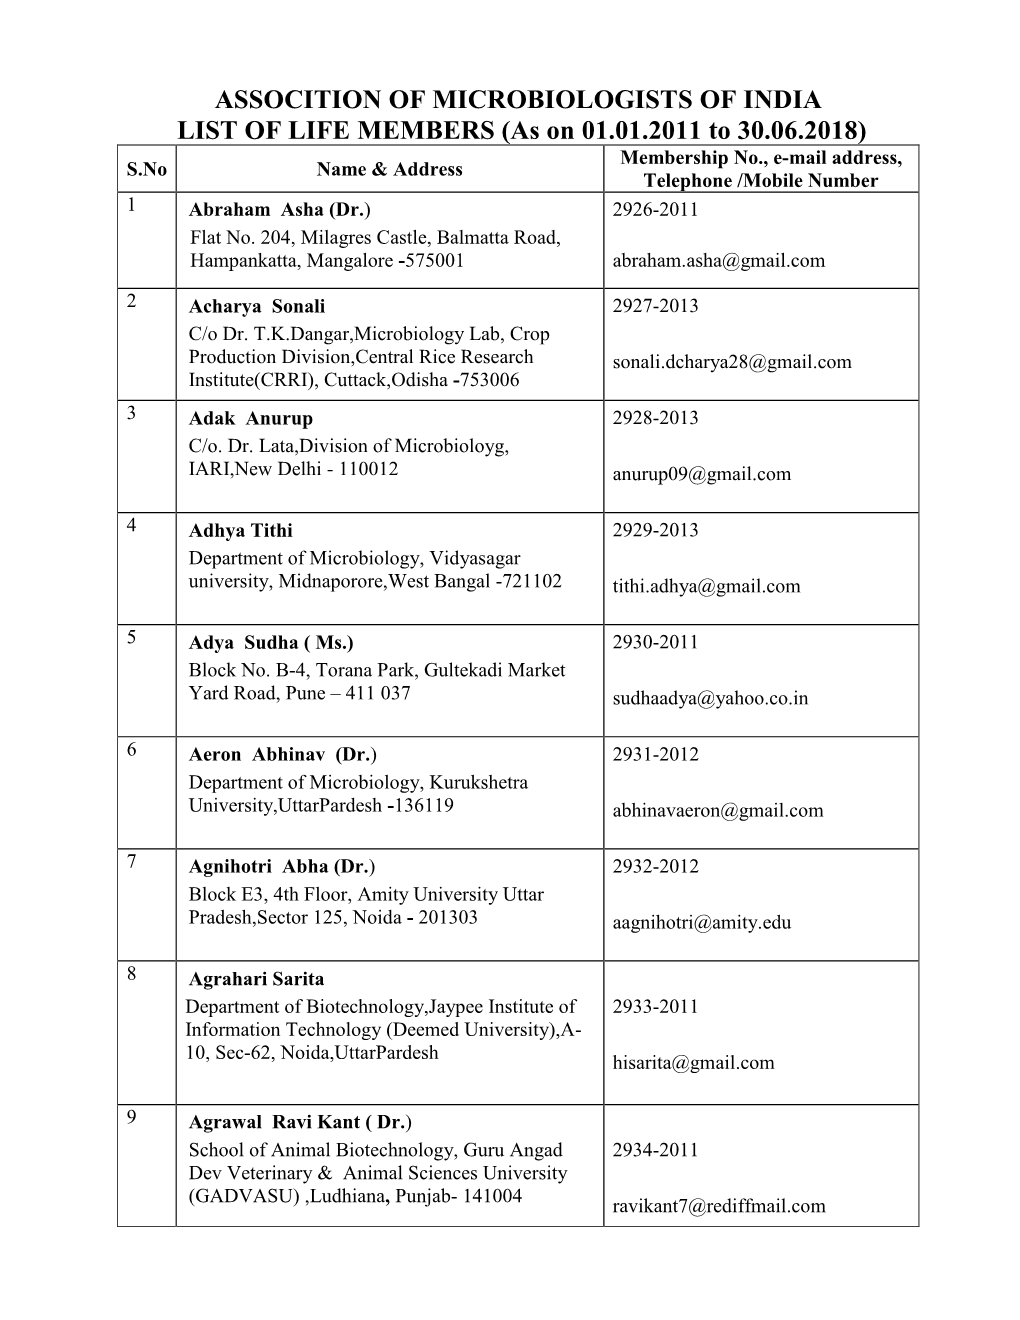 Assocition of Microbiologists of India List of Life Members